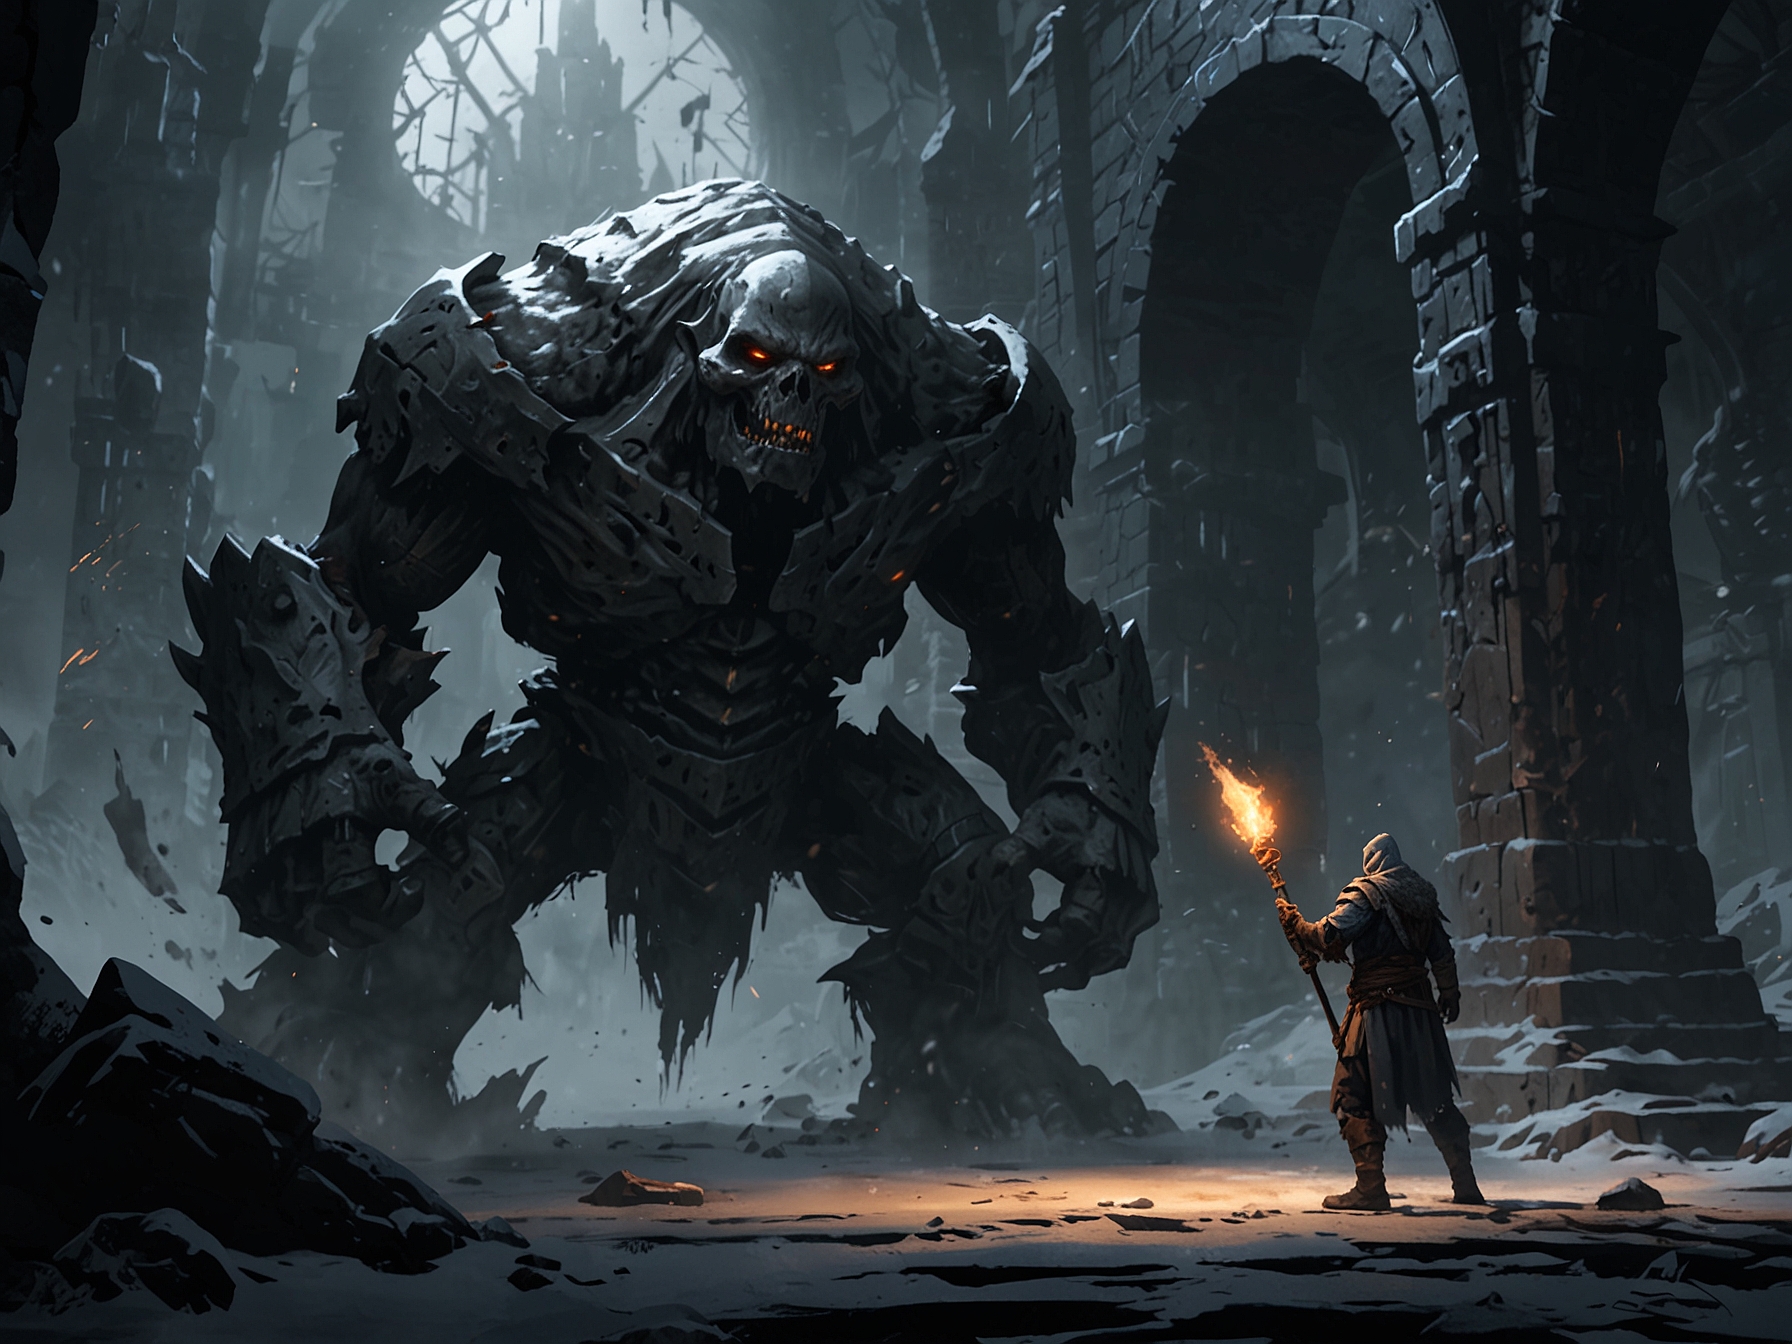 A player character preparing for battle, wielding a Frostbite-enchanted weapon, while carefully observing a towering Furnace Golem's movements in an eerie Elden Ring environment.